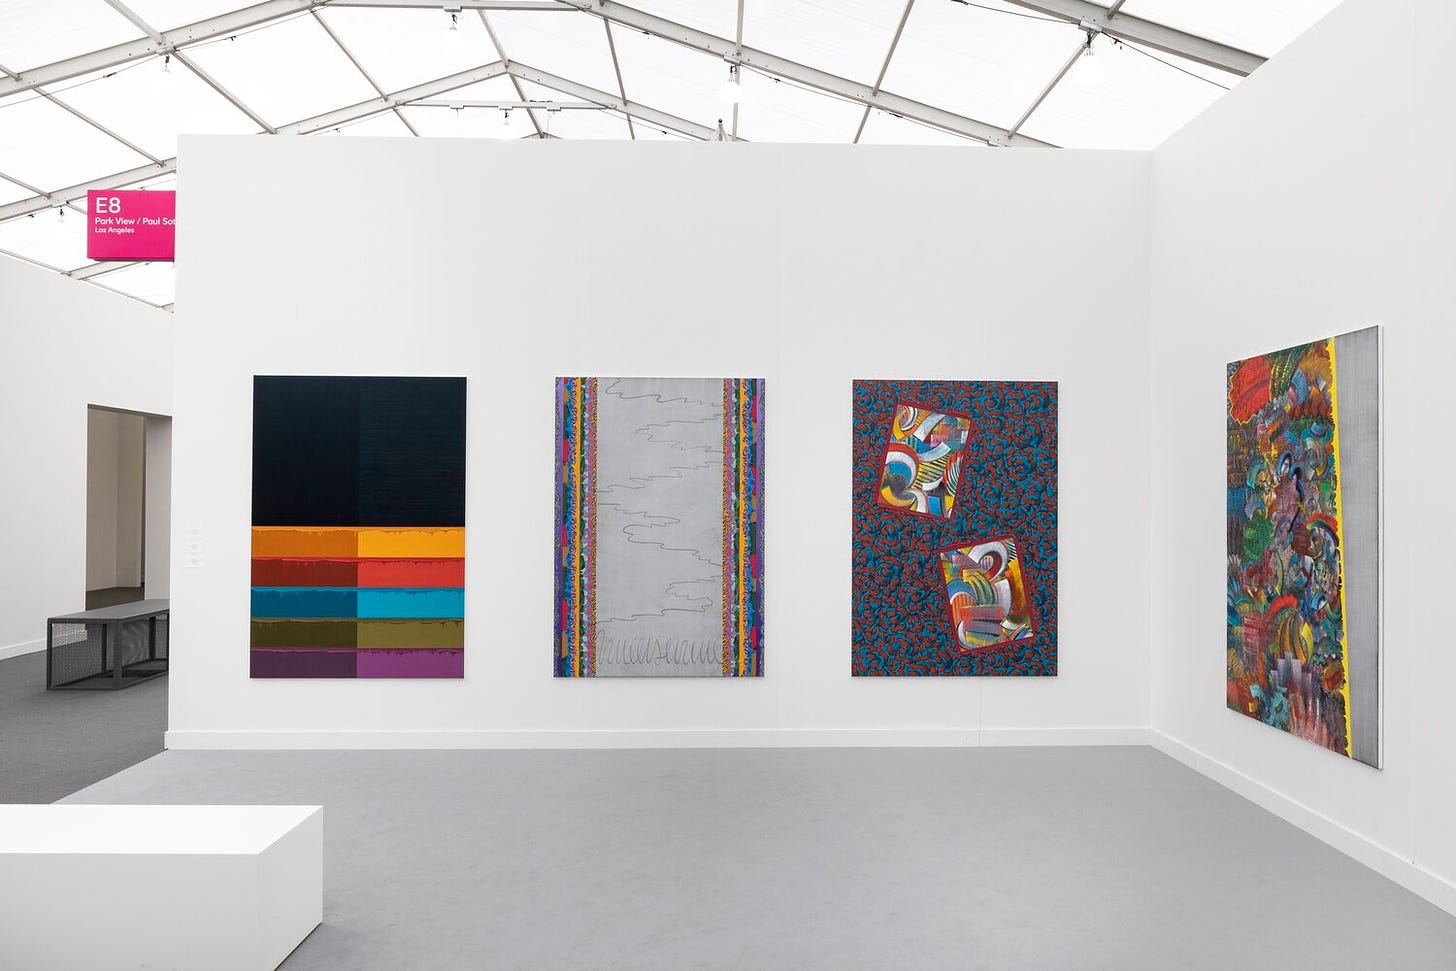 Alex Olson with Park View/Paul Soto at Frieze Los Angeles, February 2020, installation view